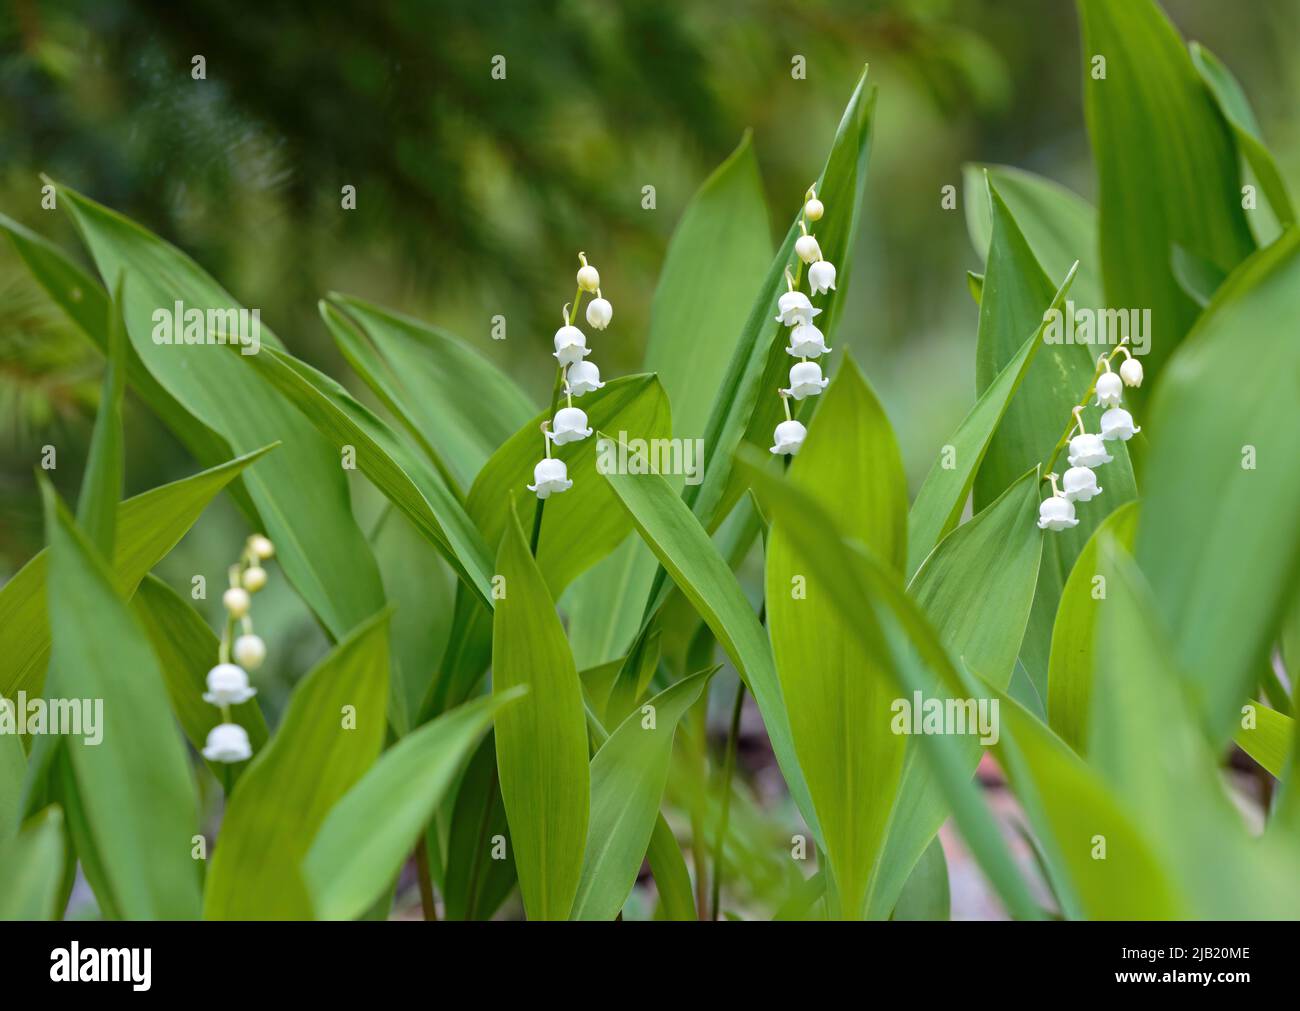 Beautiful fragile flowers of lily of the valley in bloom Stock Photo